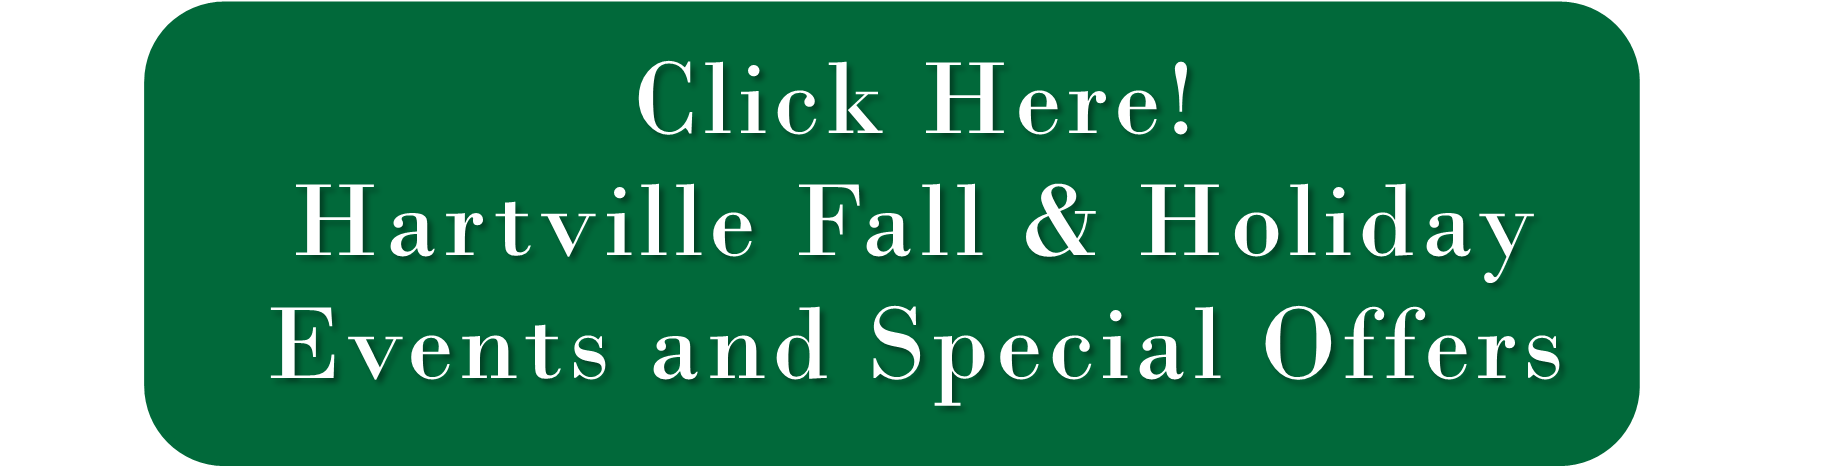 fall holiday click here button